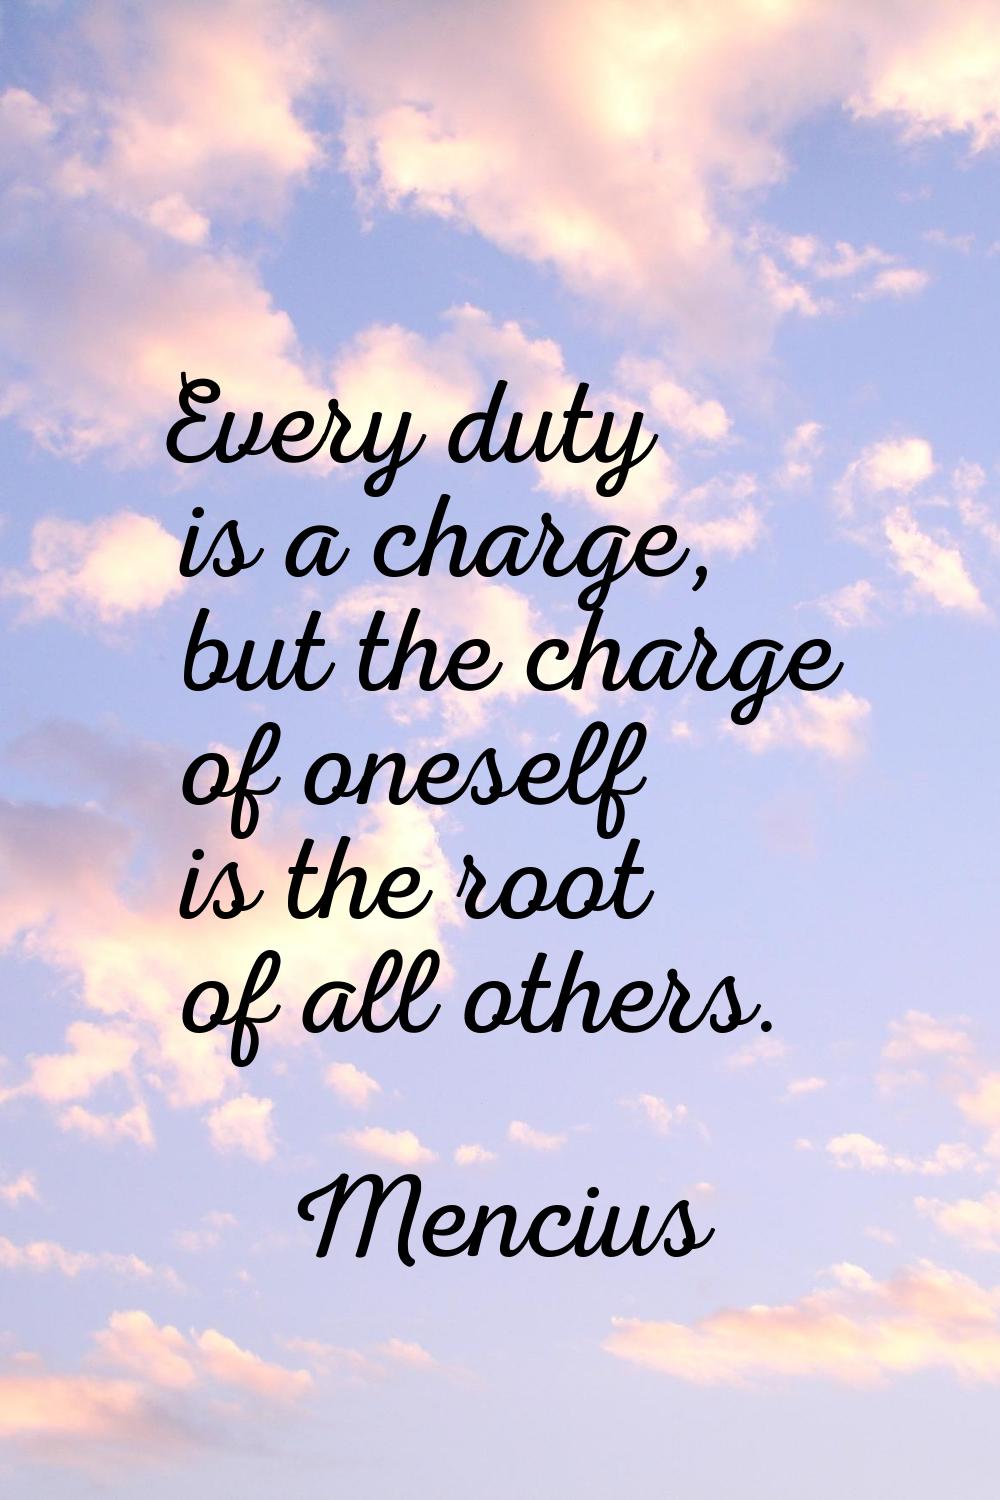 Every duty is a charge, but the charge of oneself is the root of all others.